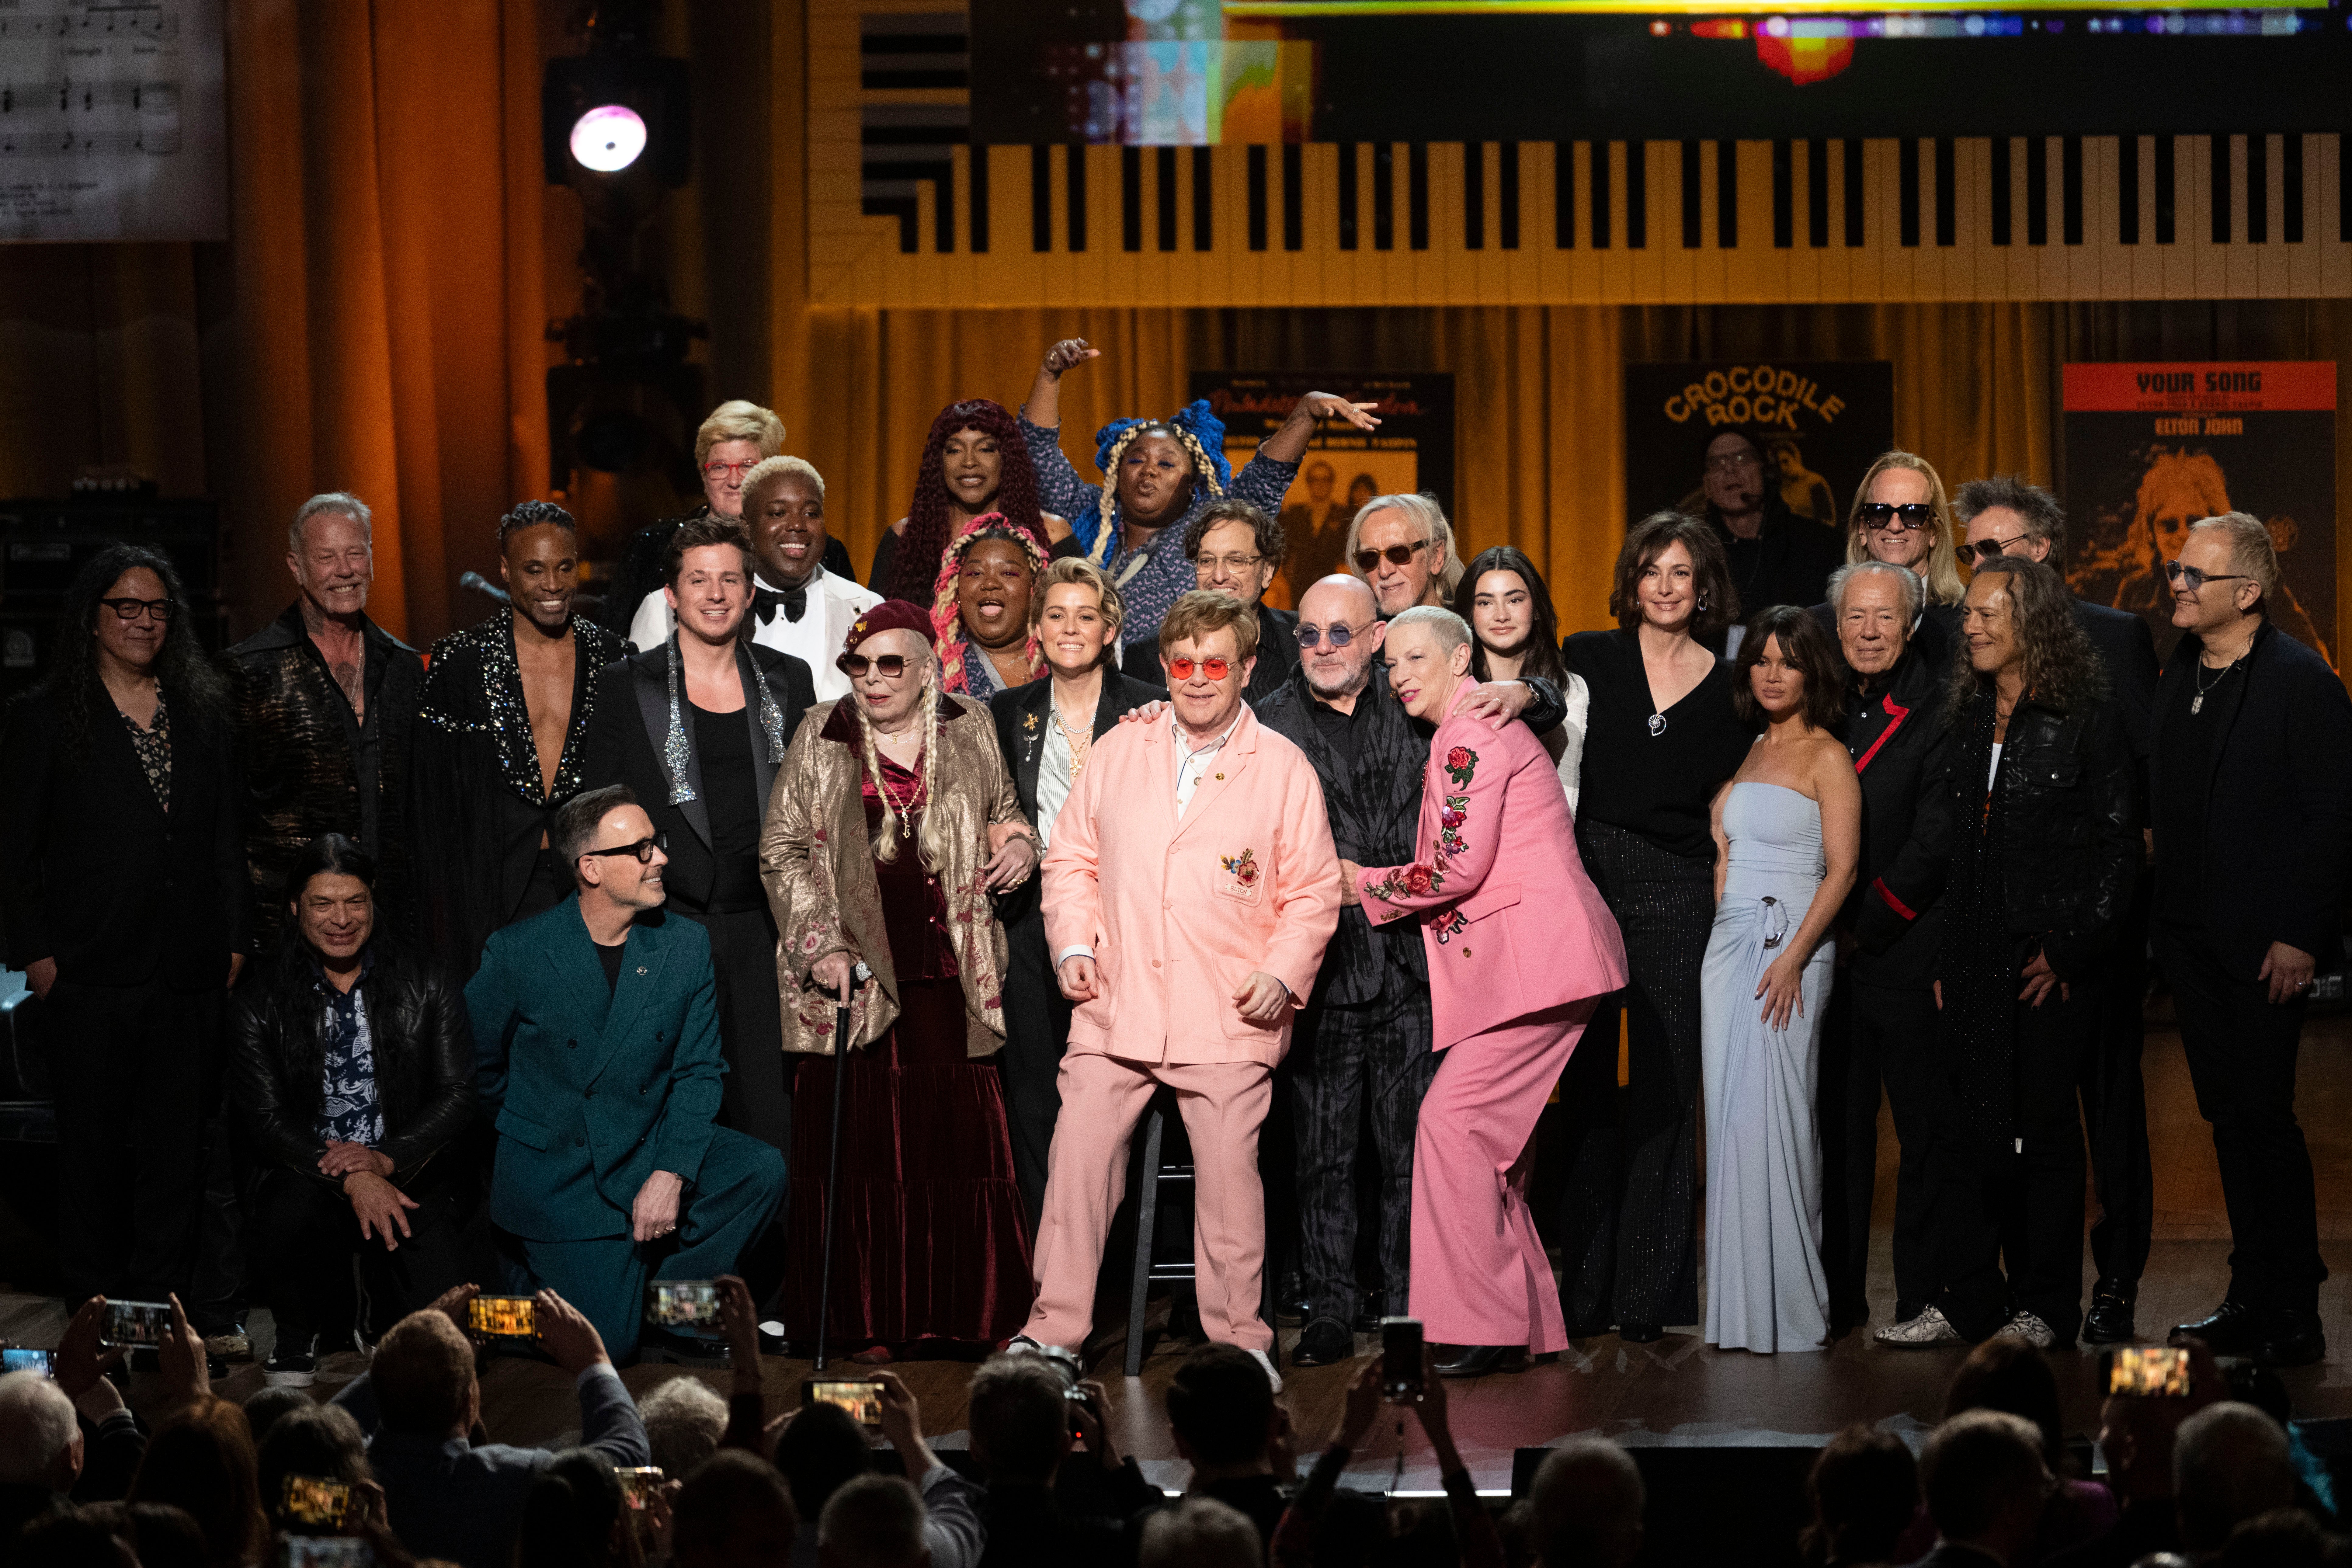 2024 Library of Congress Gershwin Prize for Popular Song honorees Elton John and Bernie Taupin are surrounded by the artists who performed in the Gershwin Prize tribute concert